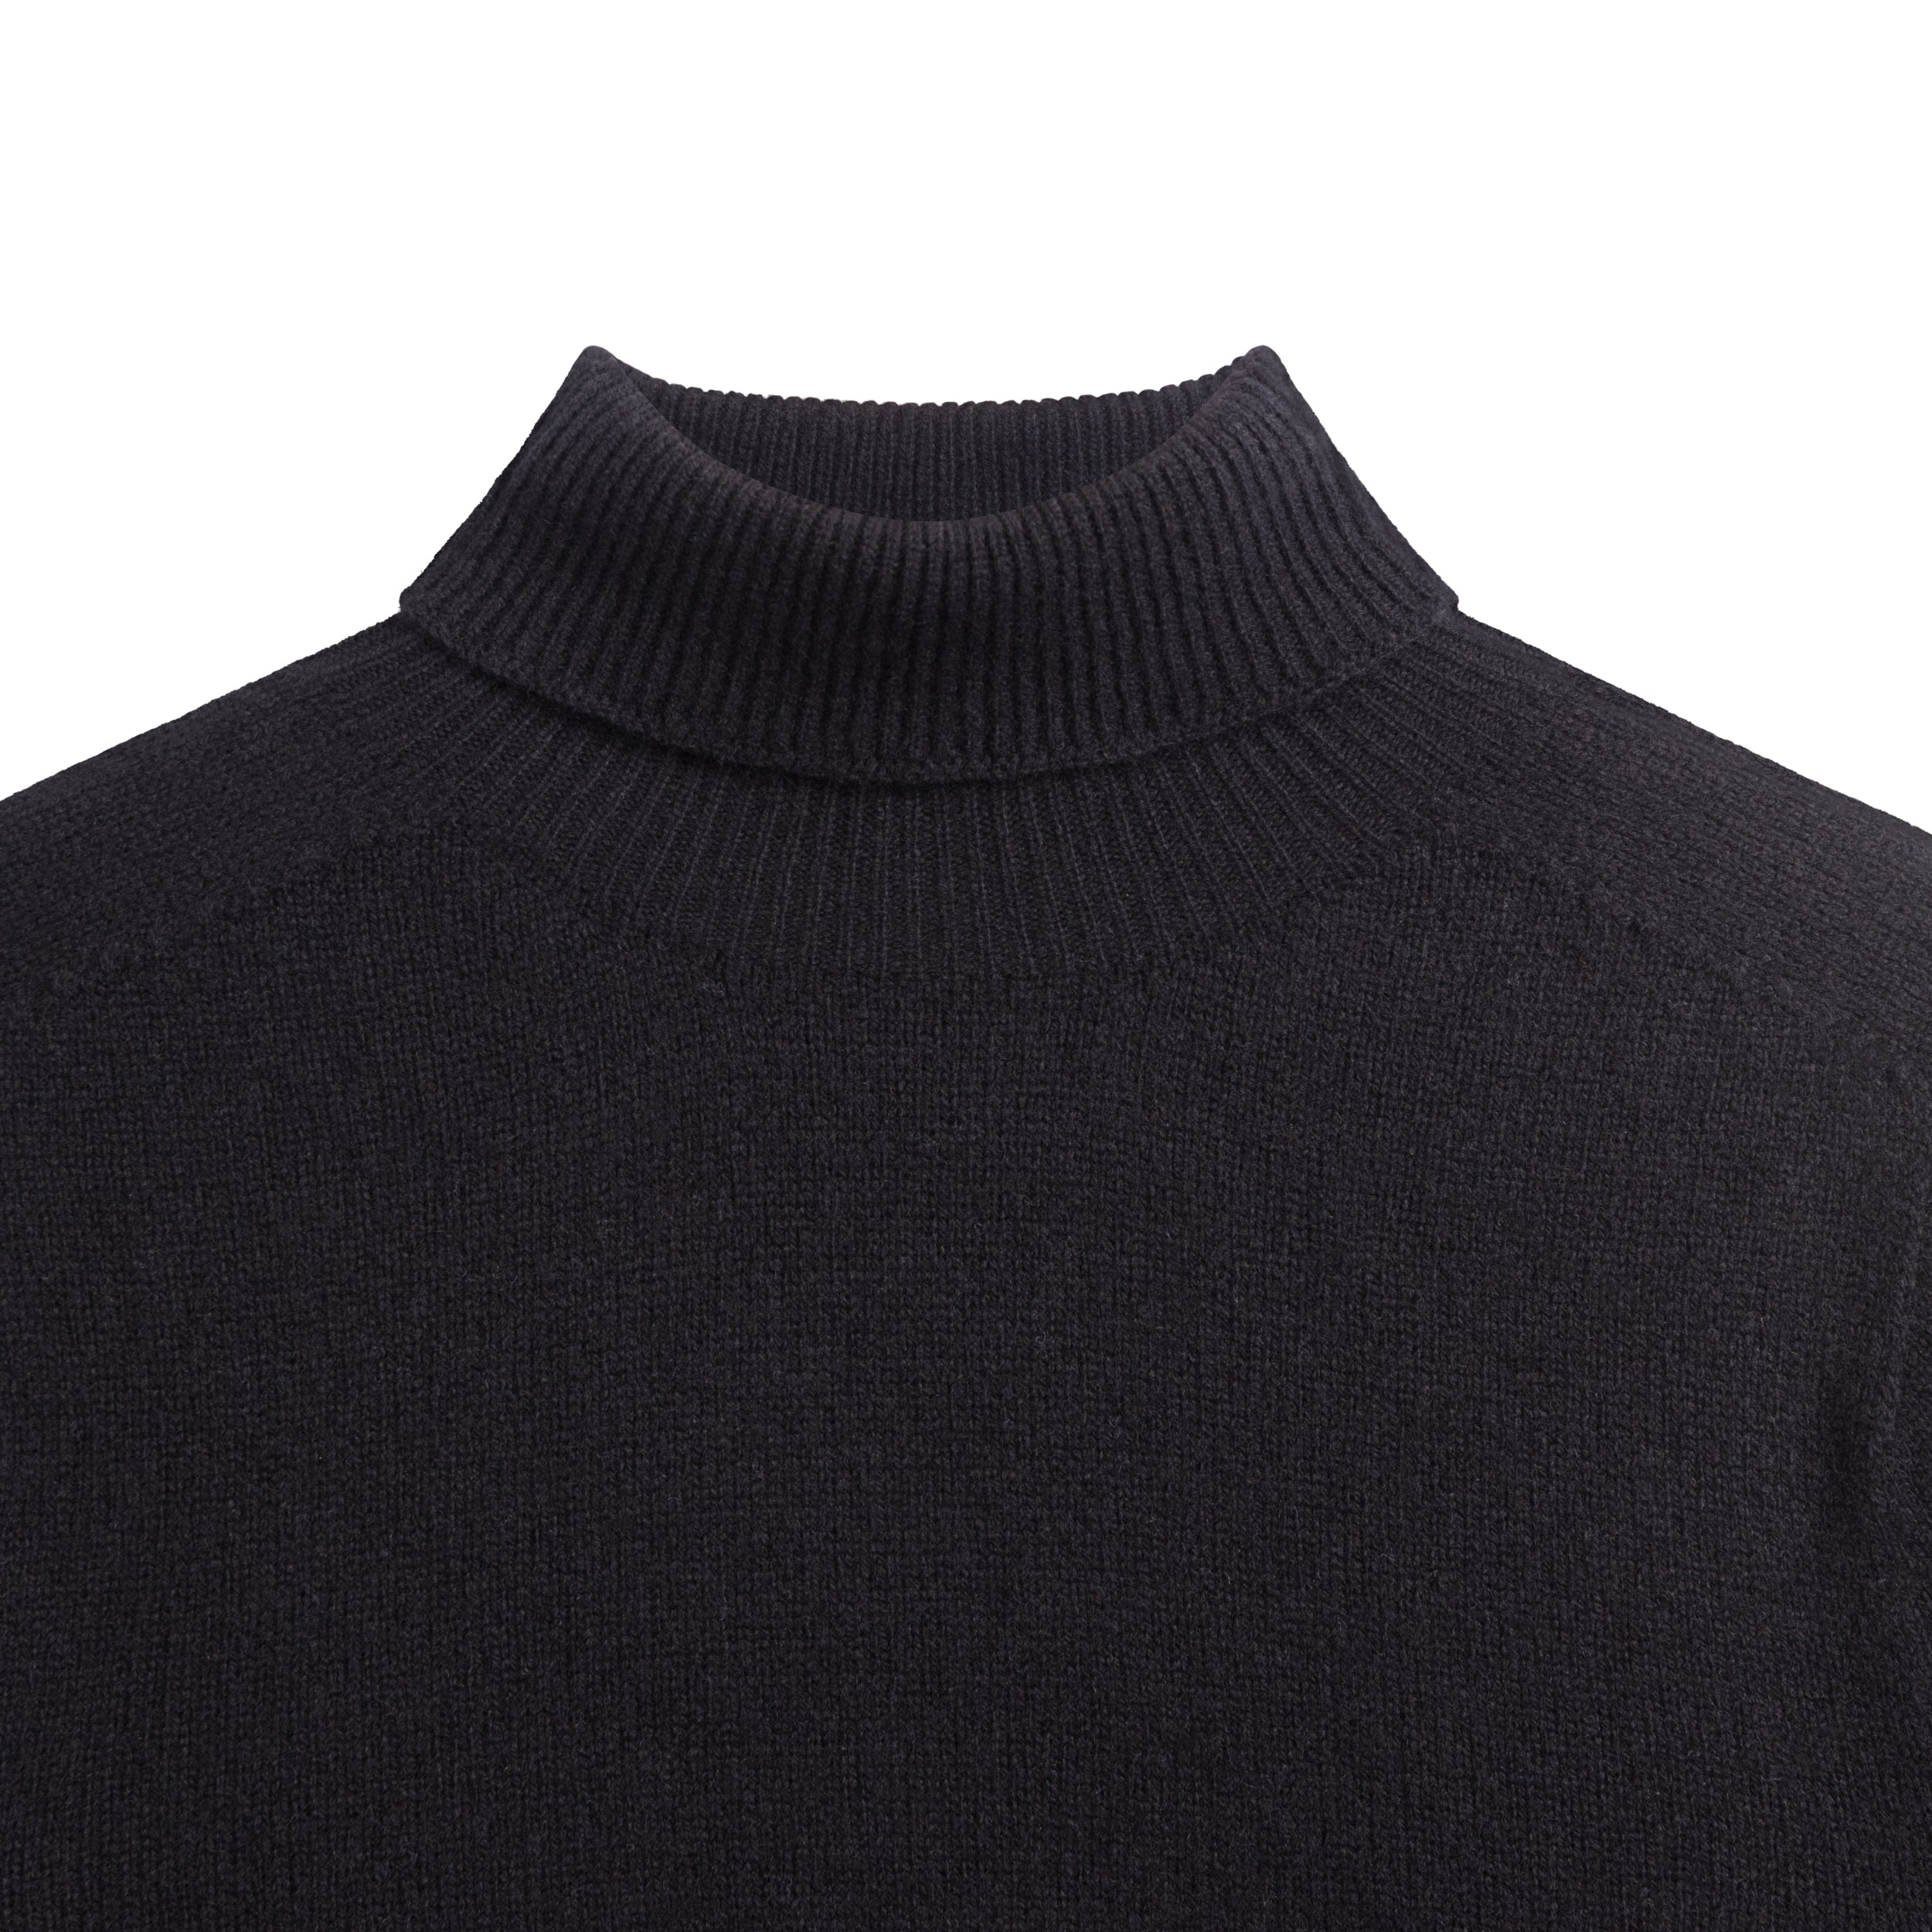 Carrier Company Cashmere and Merino Supersoft Roll Neck Jumper in Black